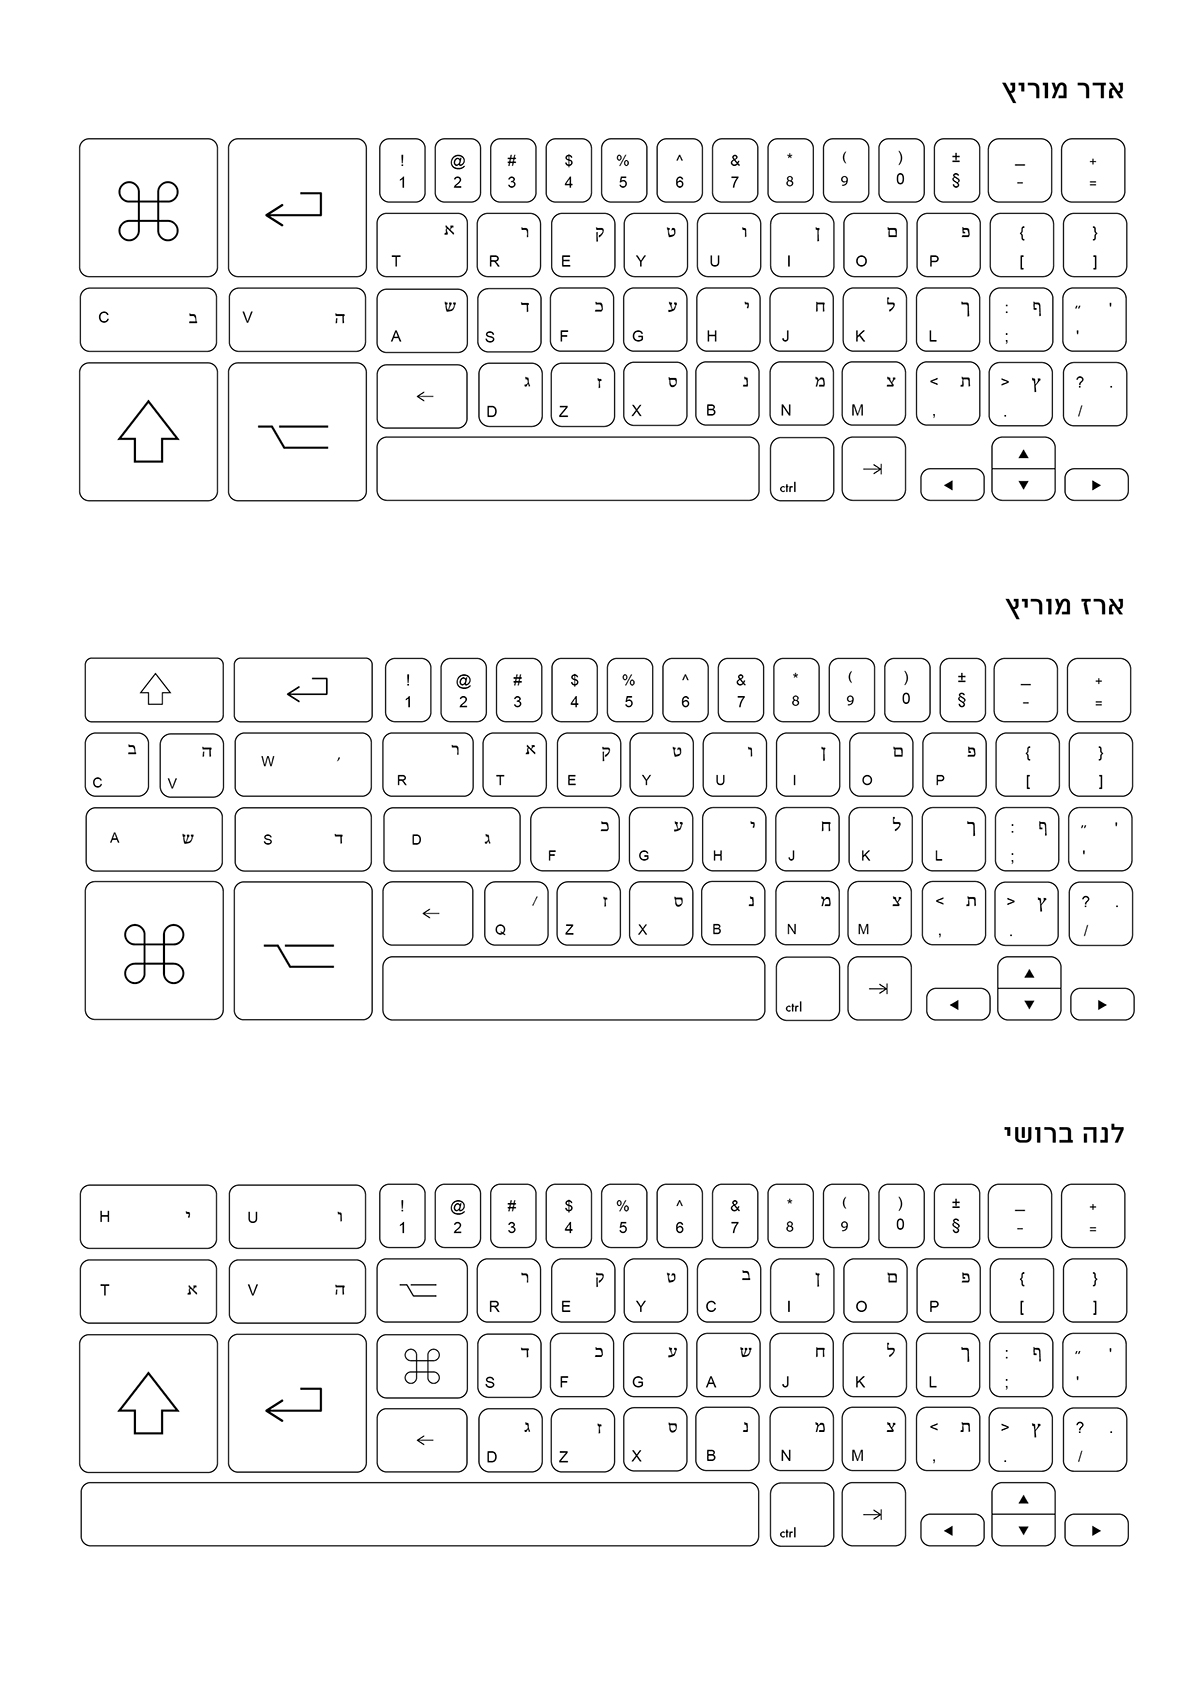 Mapping Data vusualition keyboard